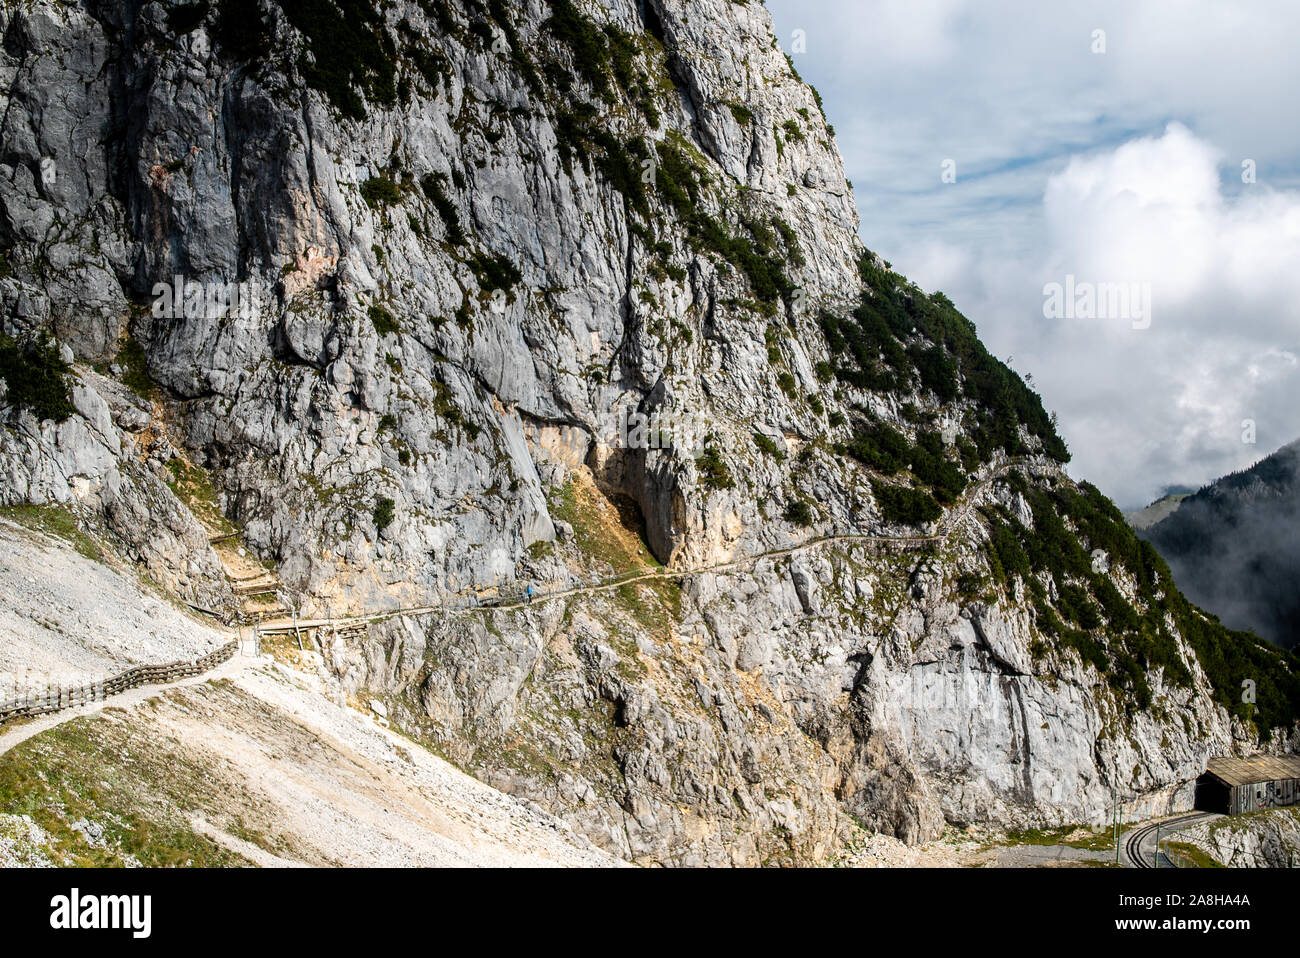 View from Wendelstein mountain. Trail at the Rock. Bayrischzell. Bavaria, Germany. Alps Stock Photo